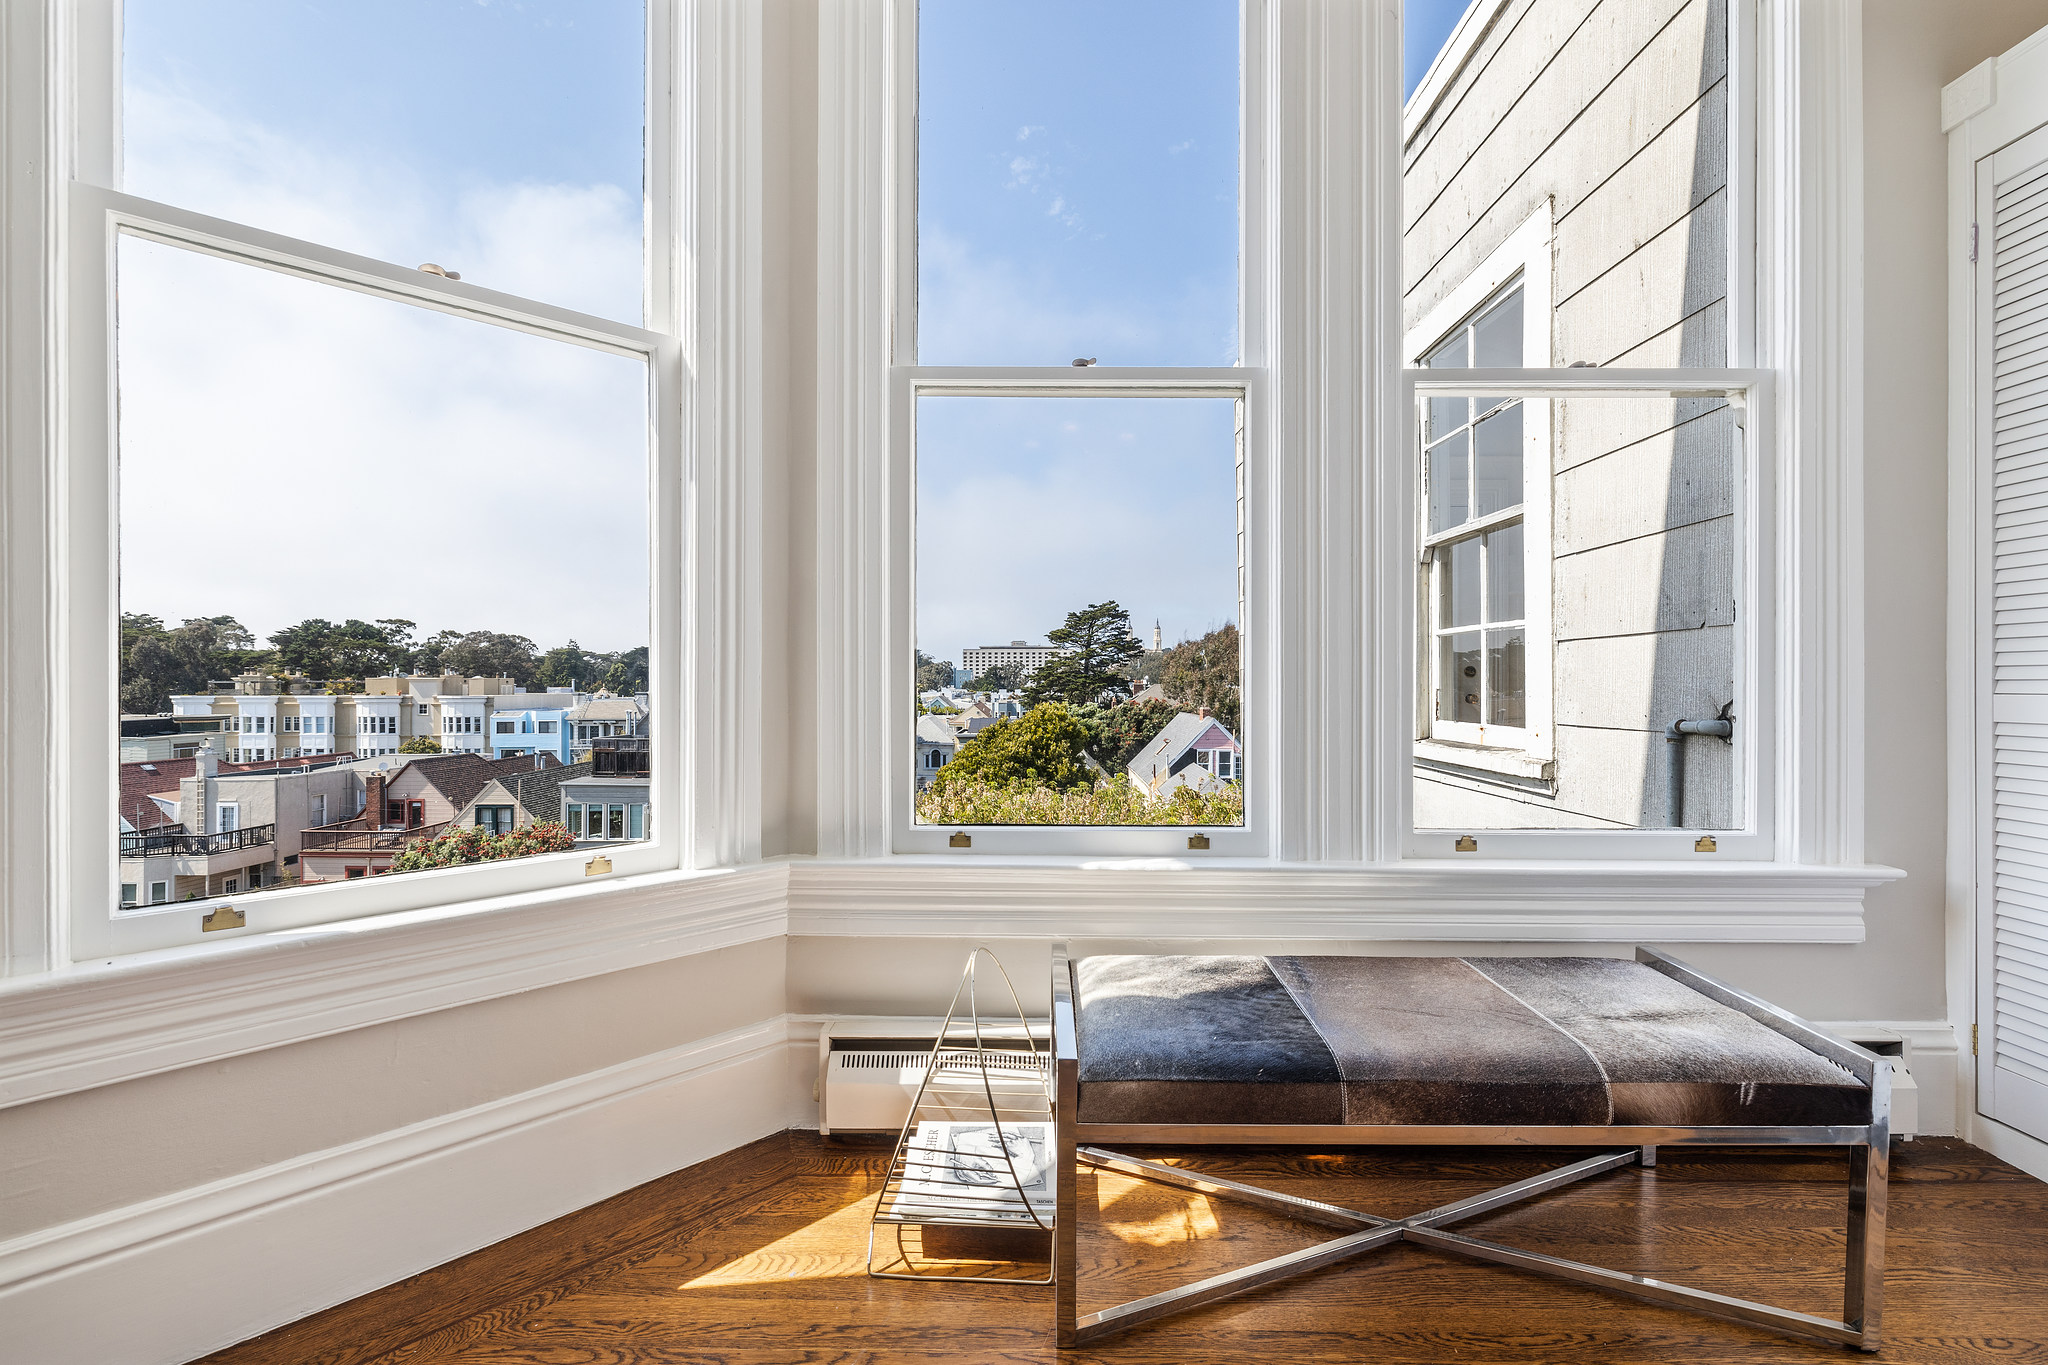 Property Photo: Close-up of the bay window with views of Cole Valley